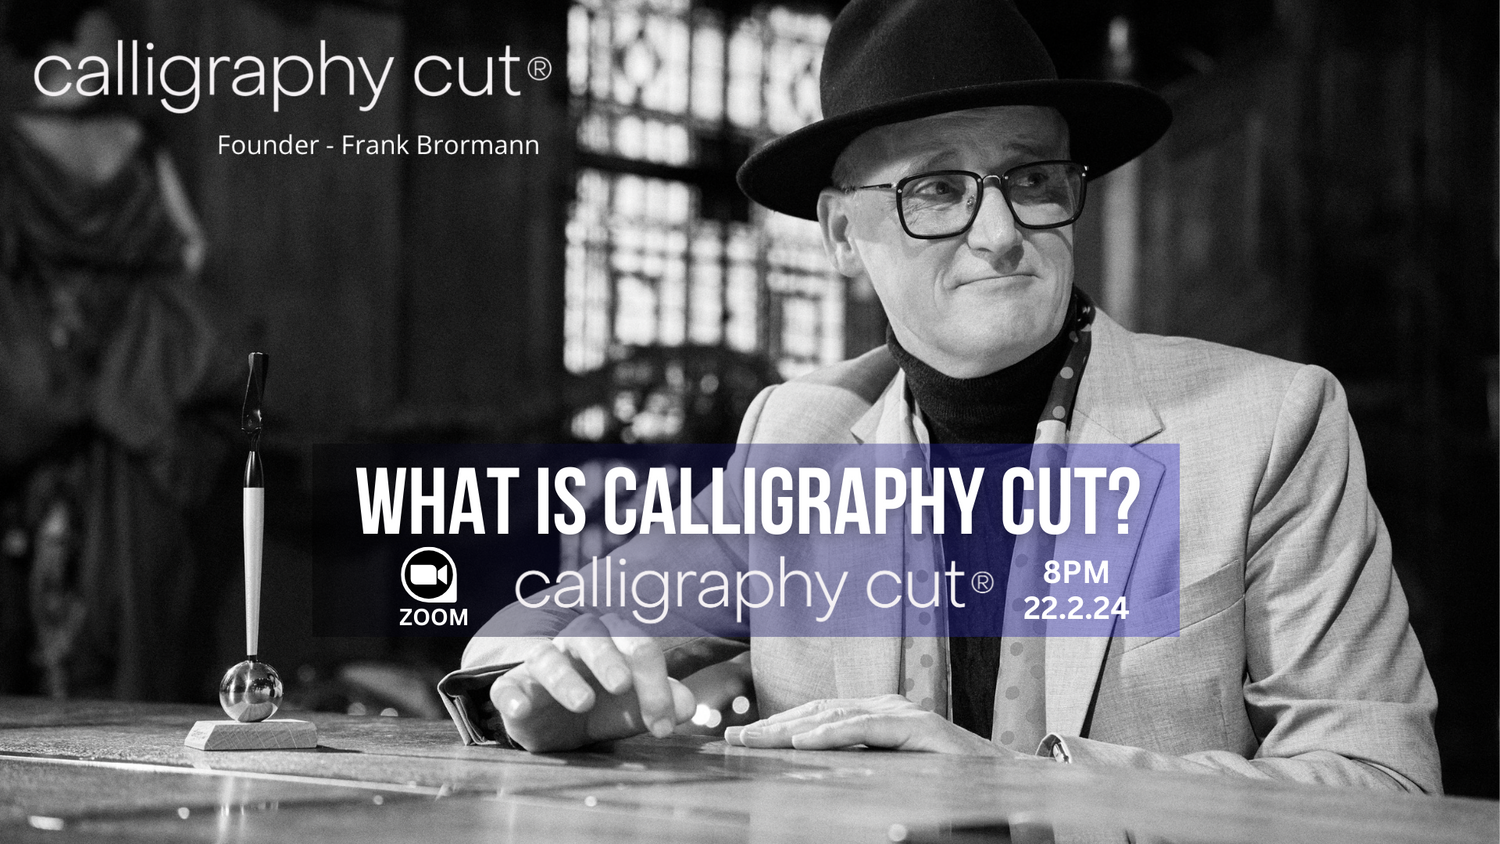 WHAT IS CALLIGRAPHY CUT?